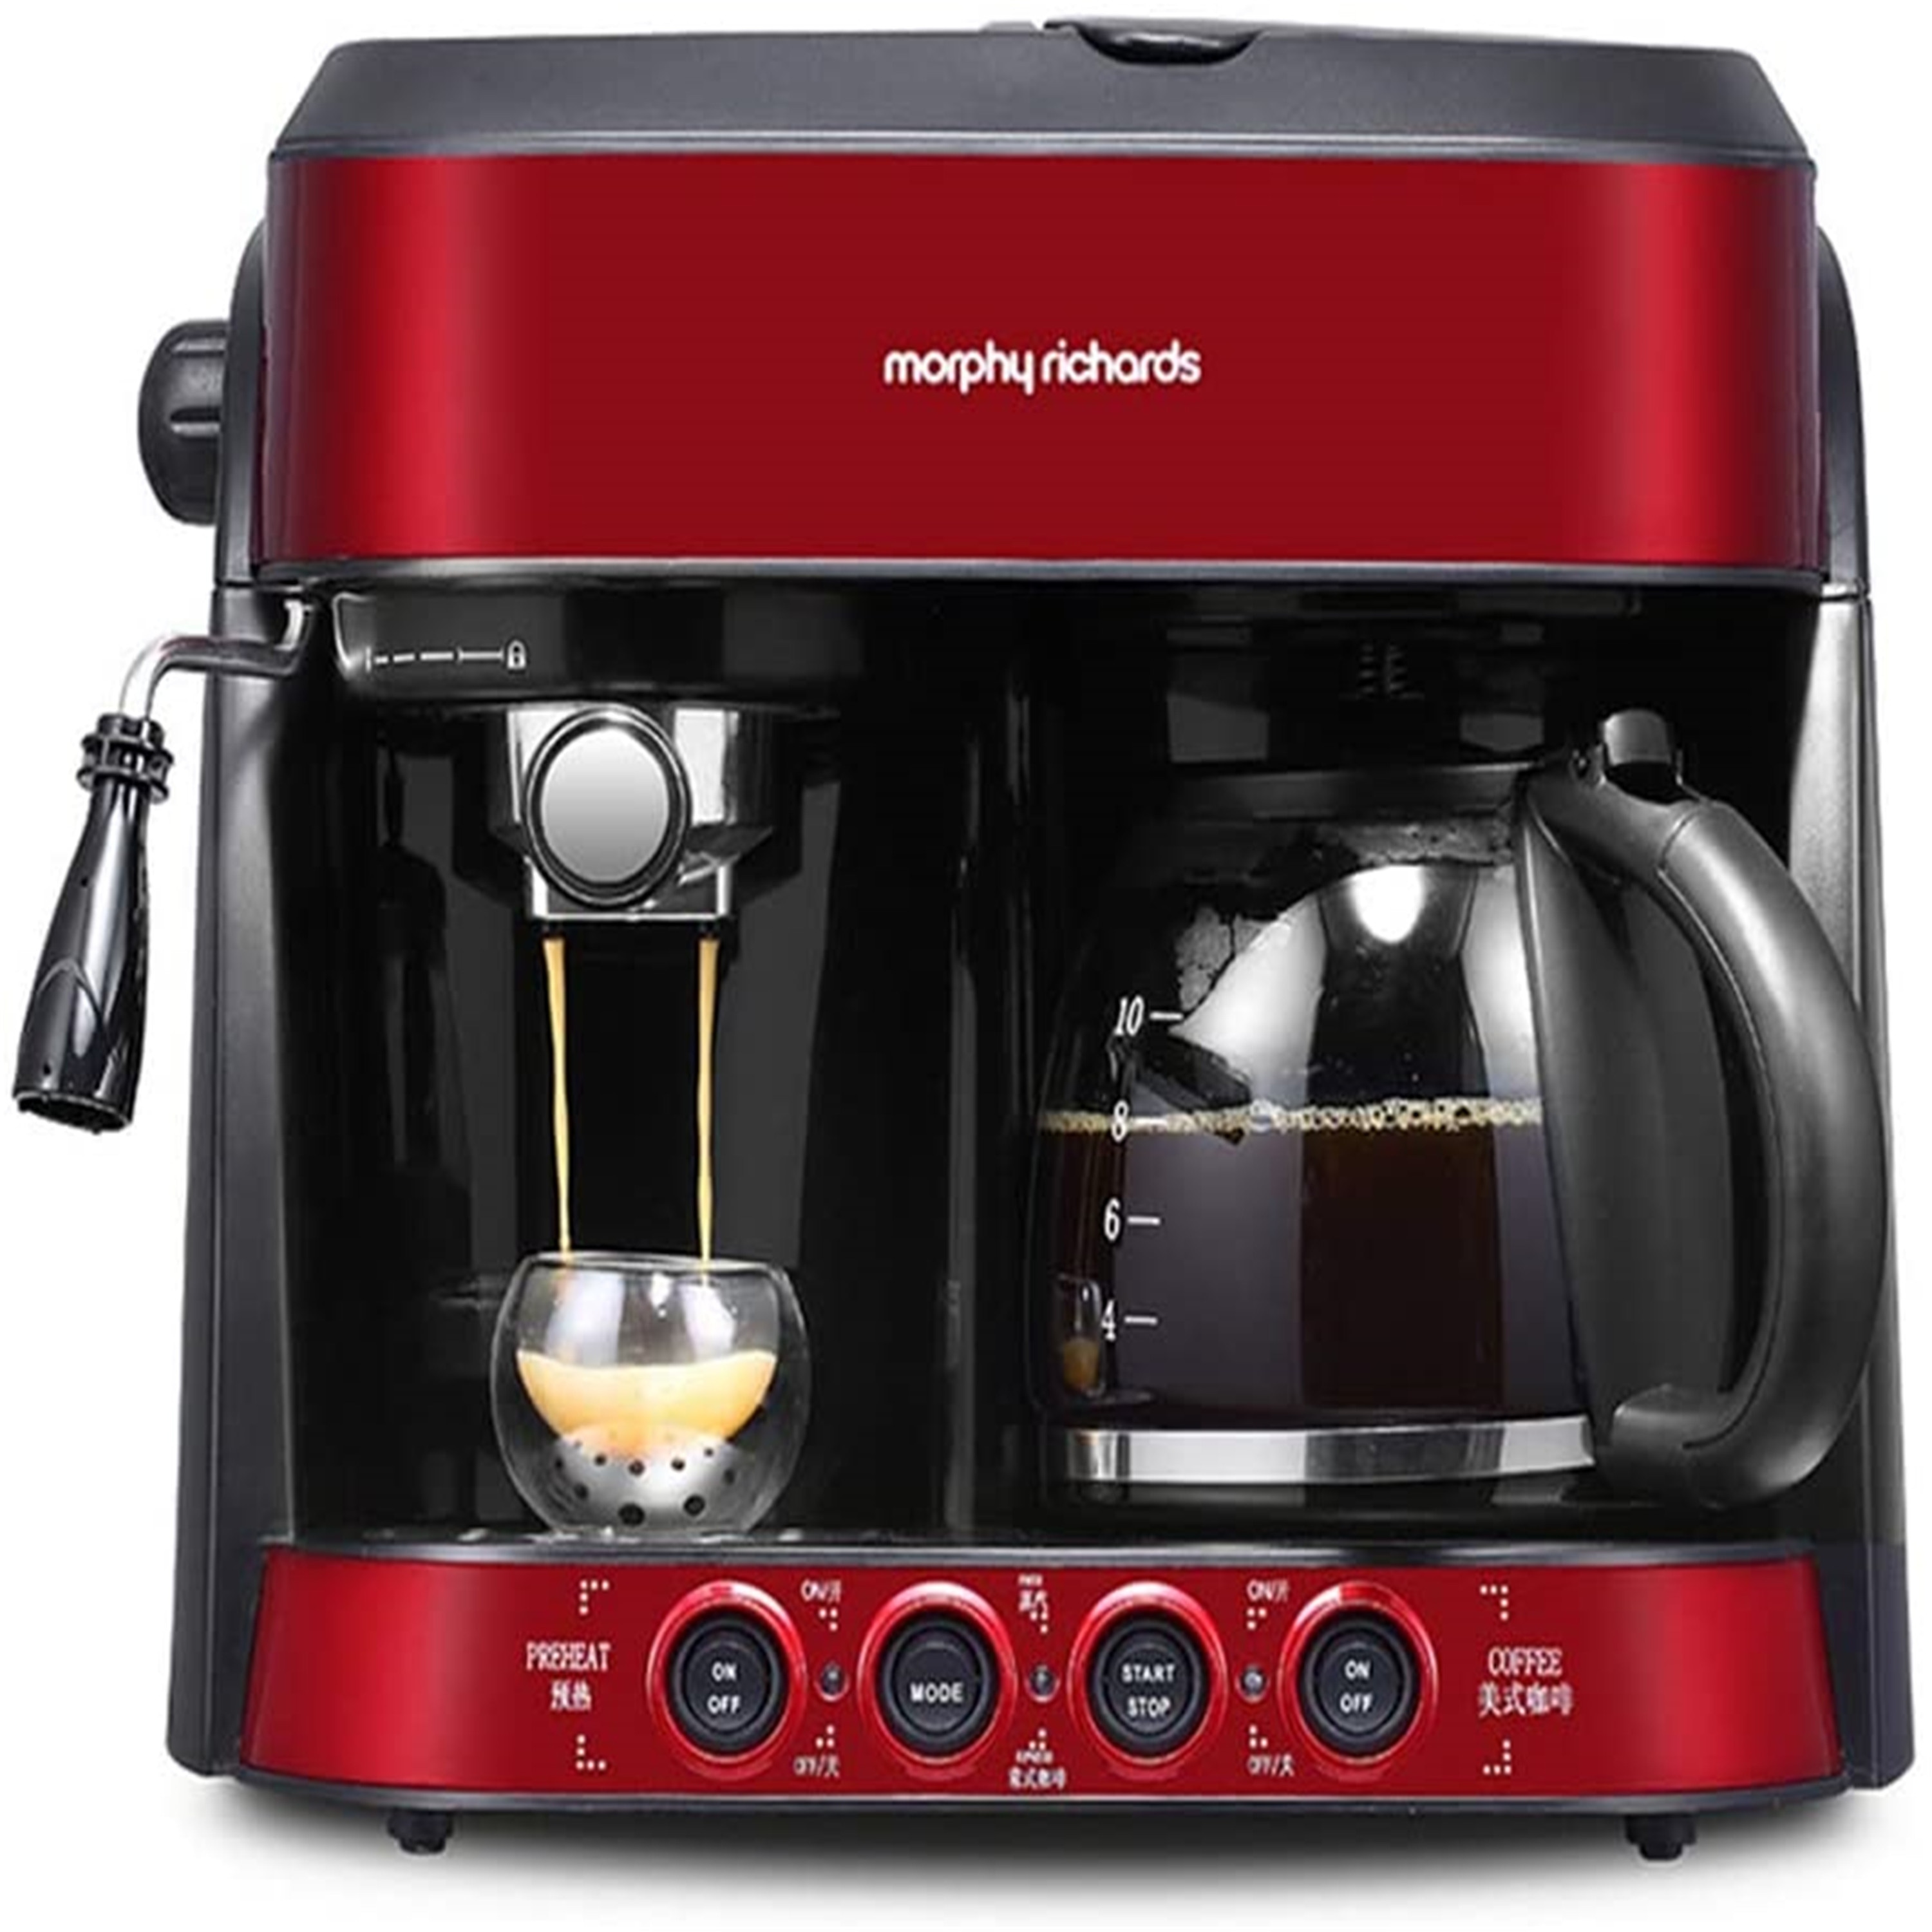 https://ak1.ostkcdn.com/images/products/is/images/direct/e66a446871119b4f373ad4a9452af37d5faeef67/Coffee-Machine%2C-American-Style%2C-Italian-Two-in-One%2C-Can-Do-All-Kinds-of-Coffee%2C-Milk-Foam%2C-Etc.jpg